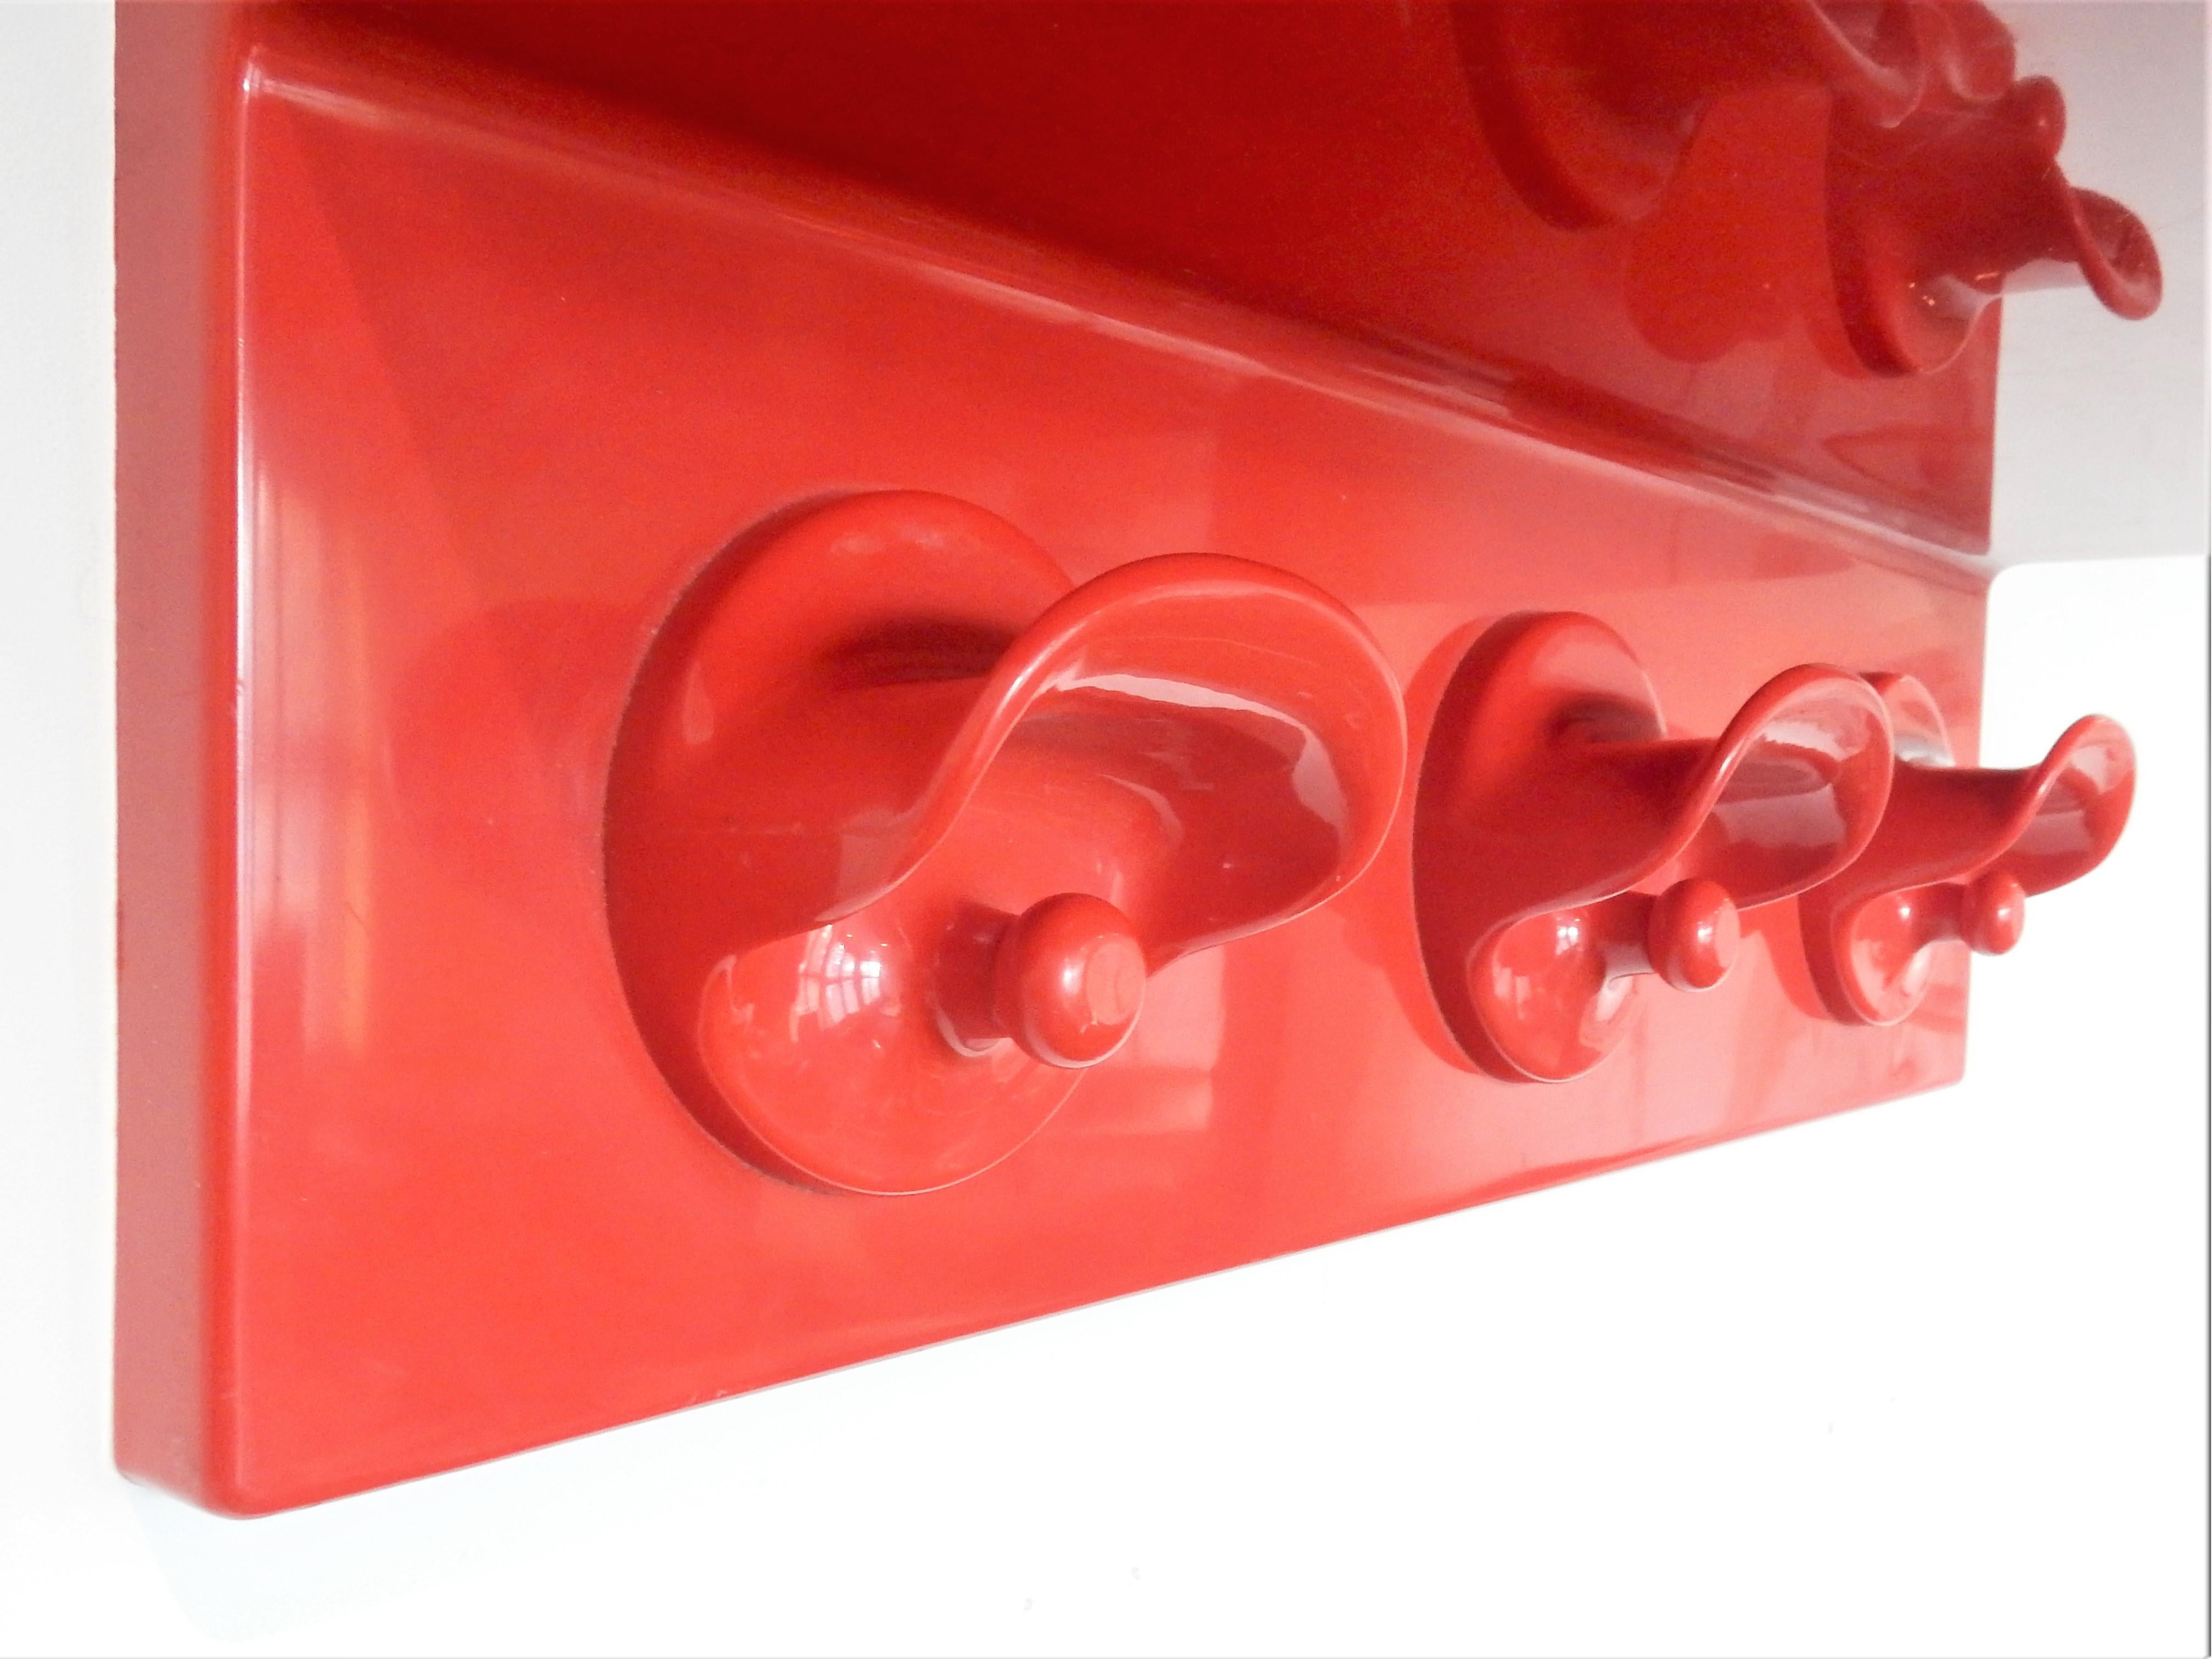 This moulded red ABS plastic coatrack with hooks and hat shelf was designed by Olaf von Bohr for Kartell in 1972. It has some light discoloration at the top of the shelf of lightly lighter circles. Very 1970s and a very nice eyecatcher in your